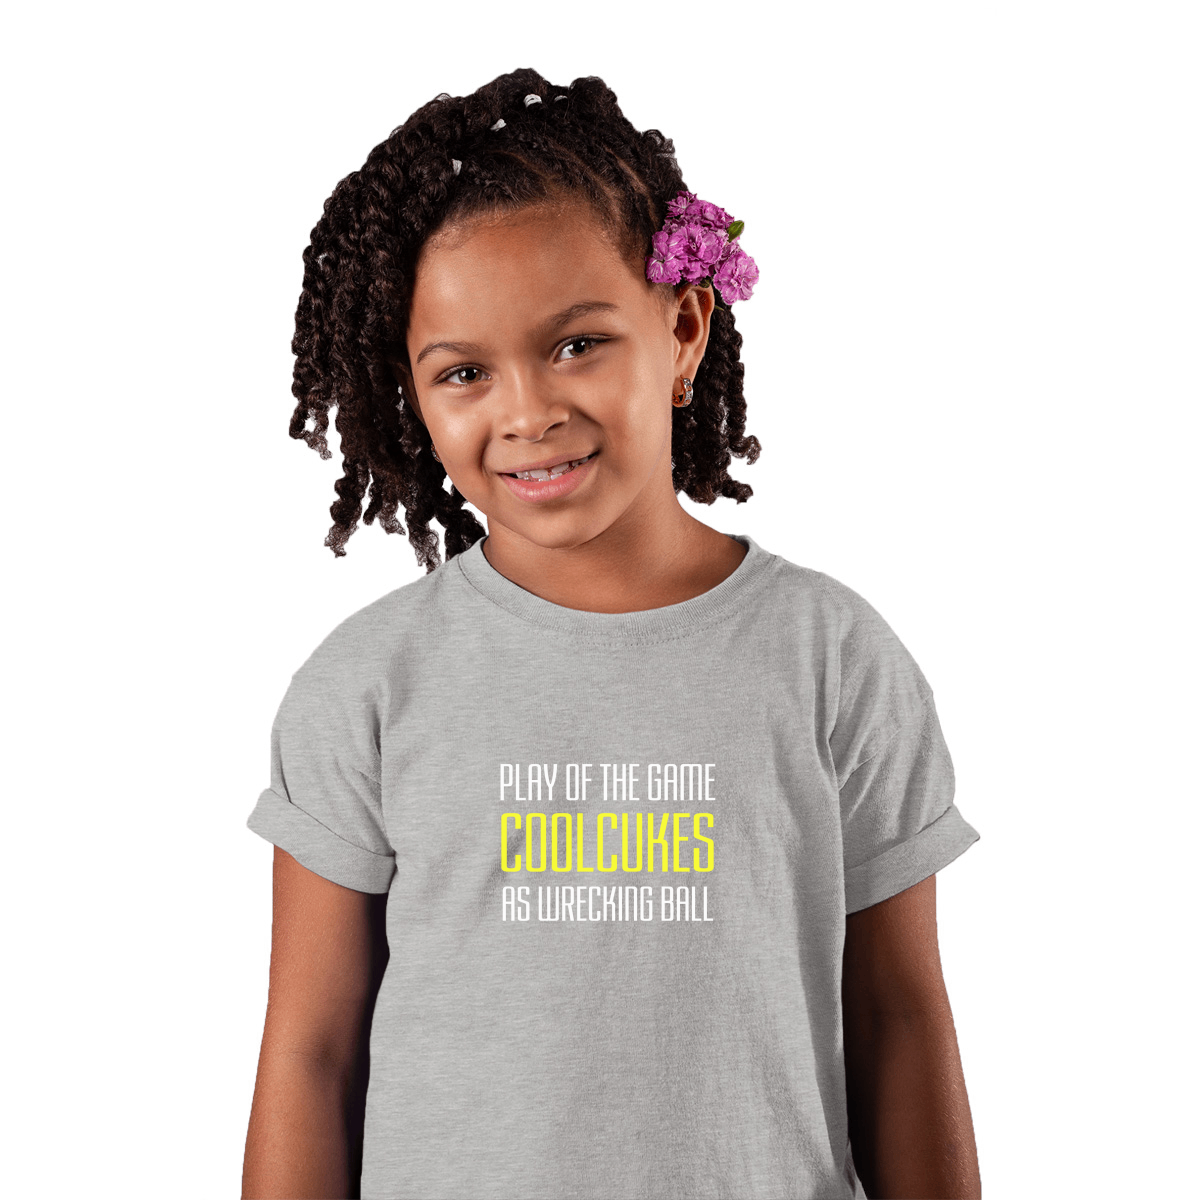 Play of the Game Kids T-shirt | Gray